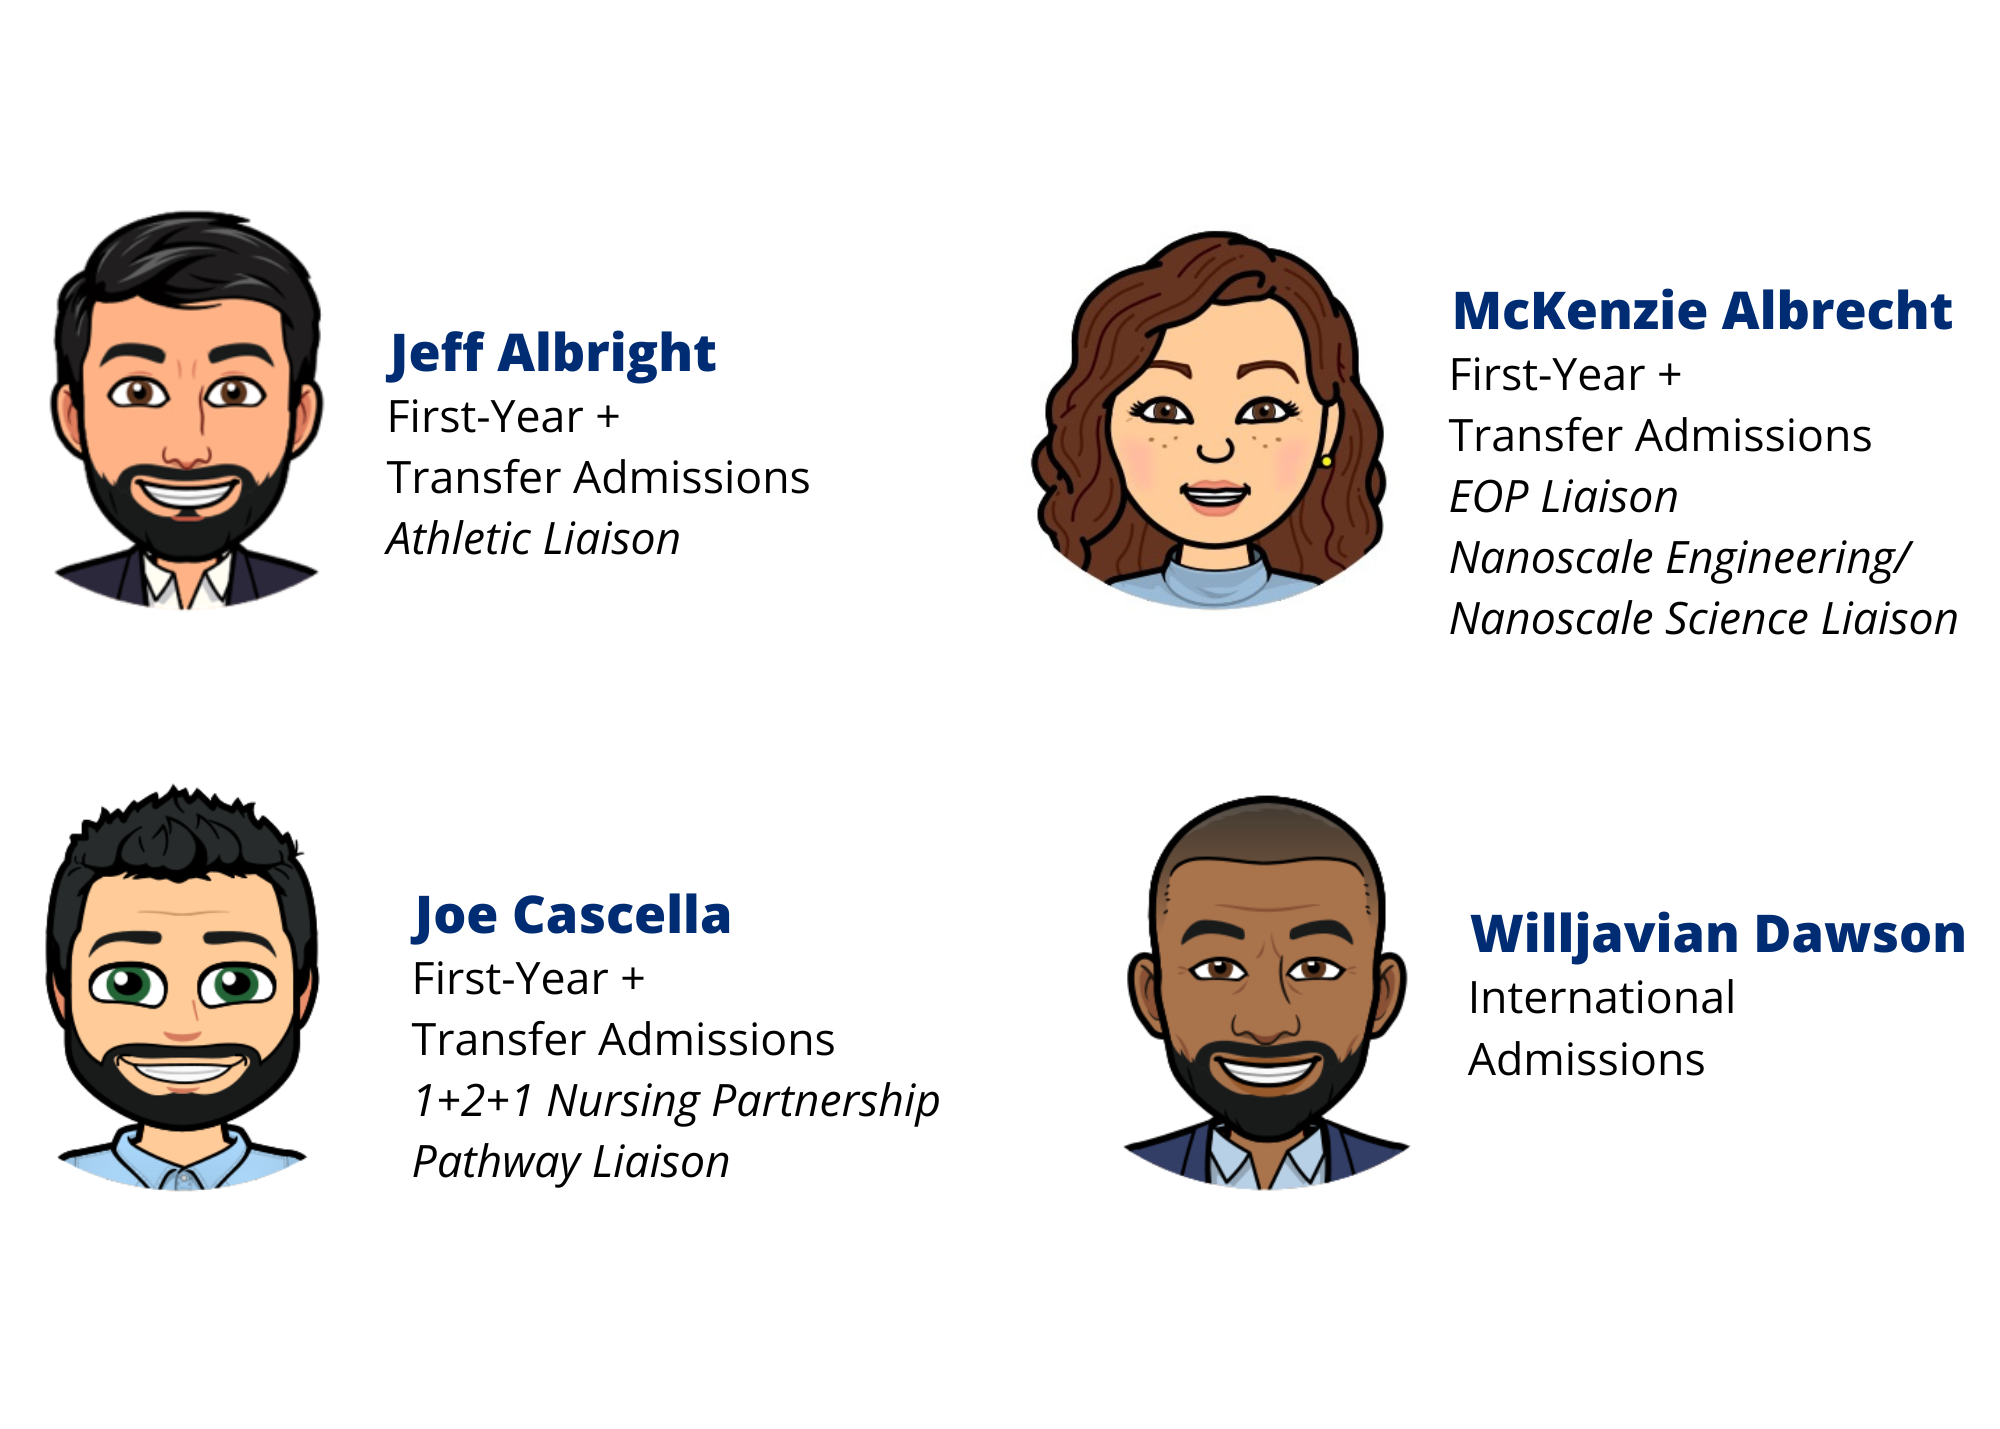 Image of Admissions Advisors with Names and Titles: Jeff Albright, First-Year Admissions + Athletic Liaison, Willjavian Dawson, First-Year Admissions + EOP Liaison, McKenzie Albrecht, Transfer Admissions + Nano Science and Engineering, and Alyssa Steele, First-Year Admissions, Joe Cascella, First Year and Transfer Admissions + Nursing Liaision